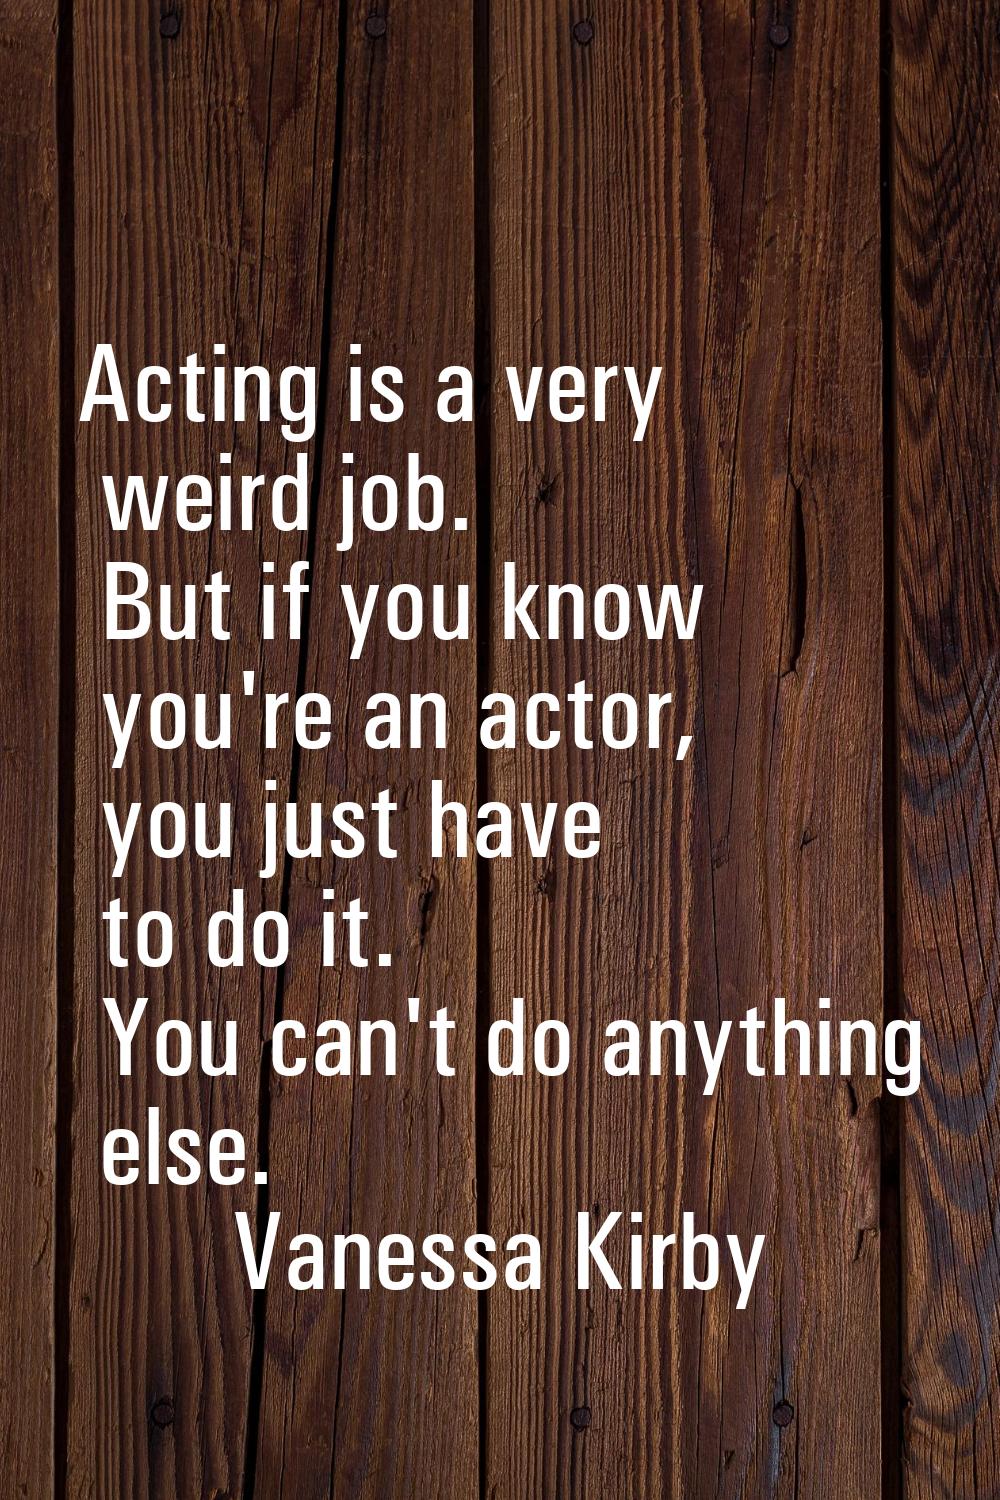 Acting is a very weird job. But if you know you're an actor, you just have to do it. You can't do a